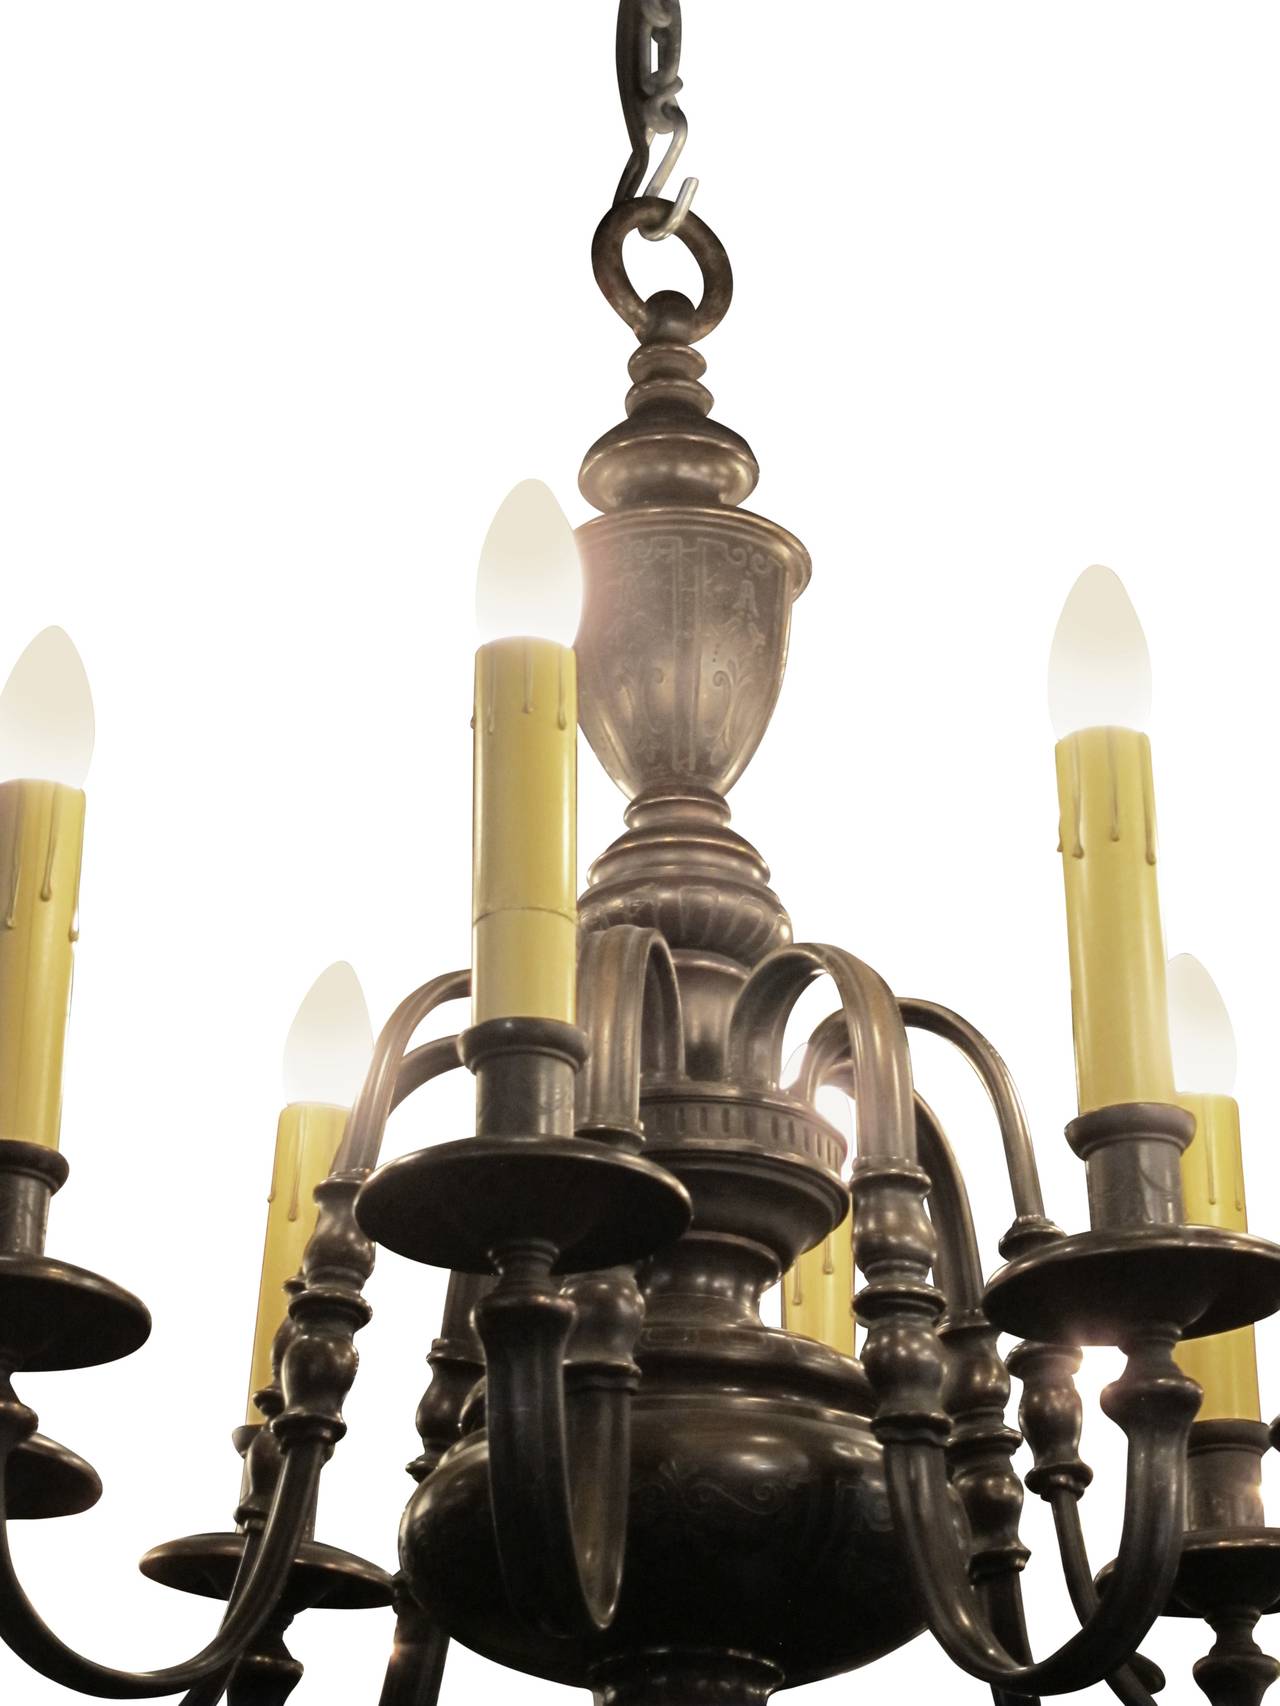 Beautifully patinated bronze Georgian style chandelier with etching details on bottom and top wells. Manufactured by EF Caldwell of NY in 1910. Cleaned and rewired. Please note, this item is located in one of our NYC locations.